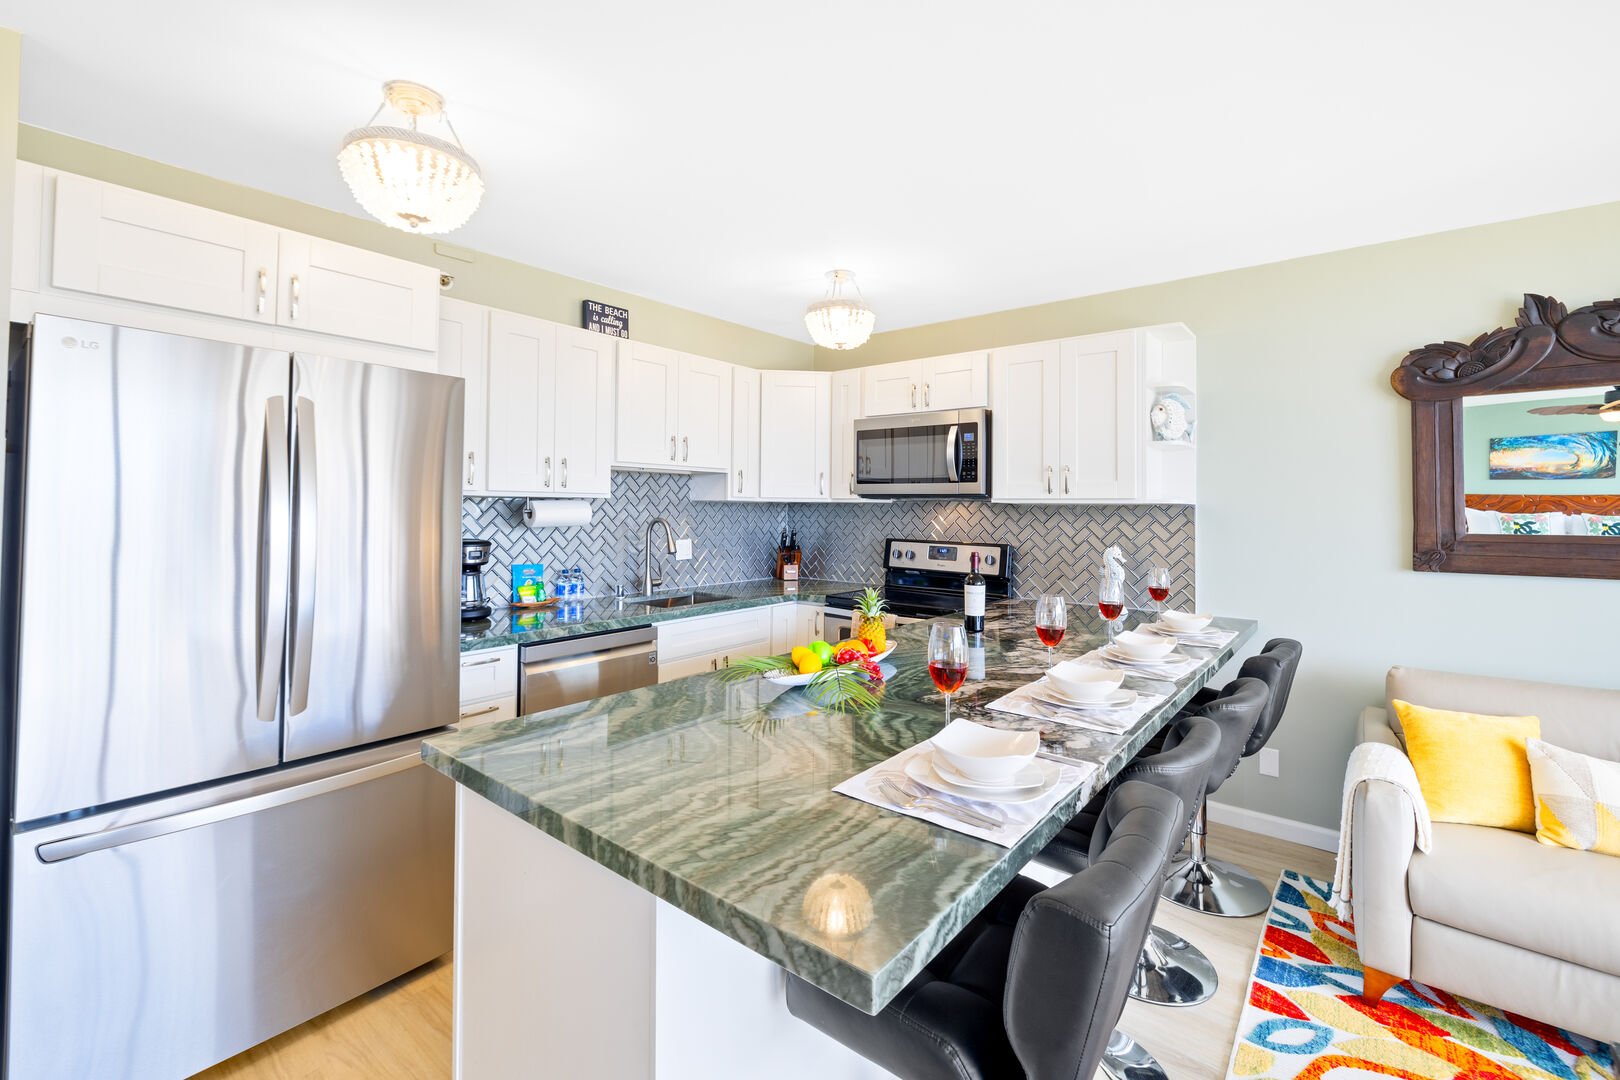 The full-equipped kitchen features beautiful Brazilian natural stone countertops and a dining area good for 4!